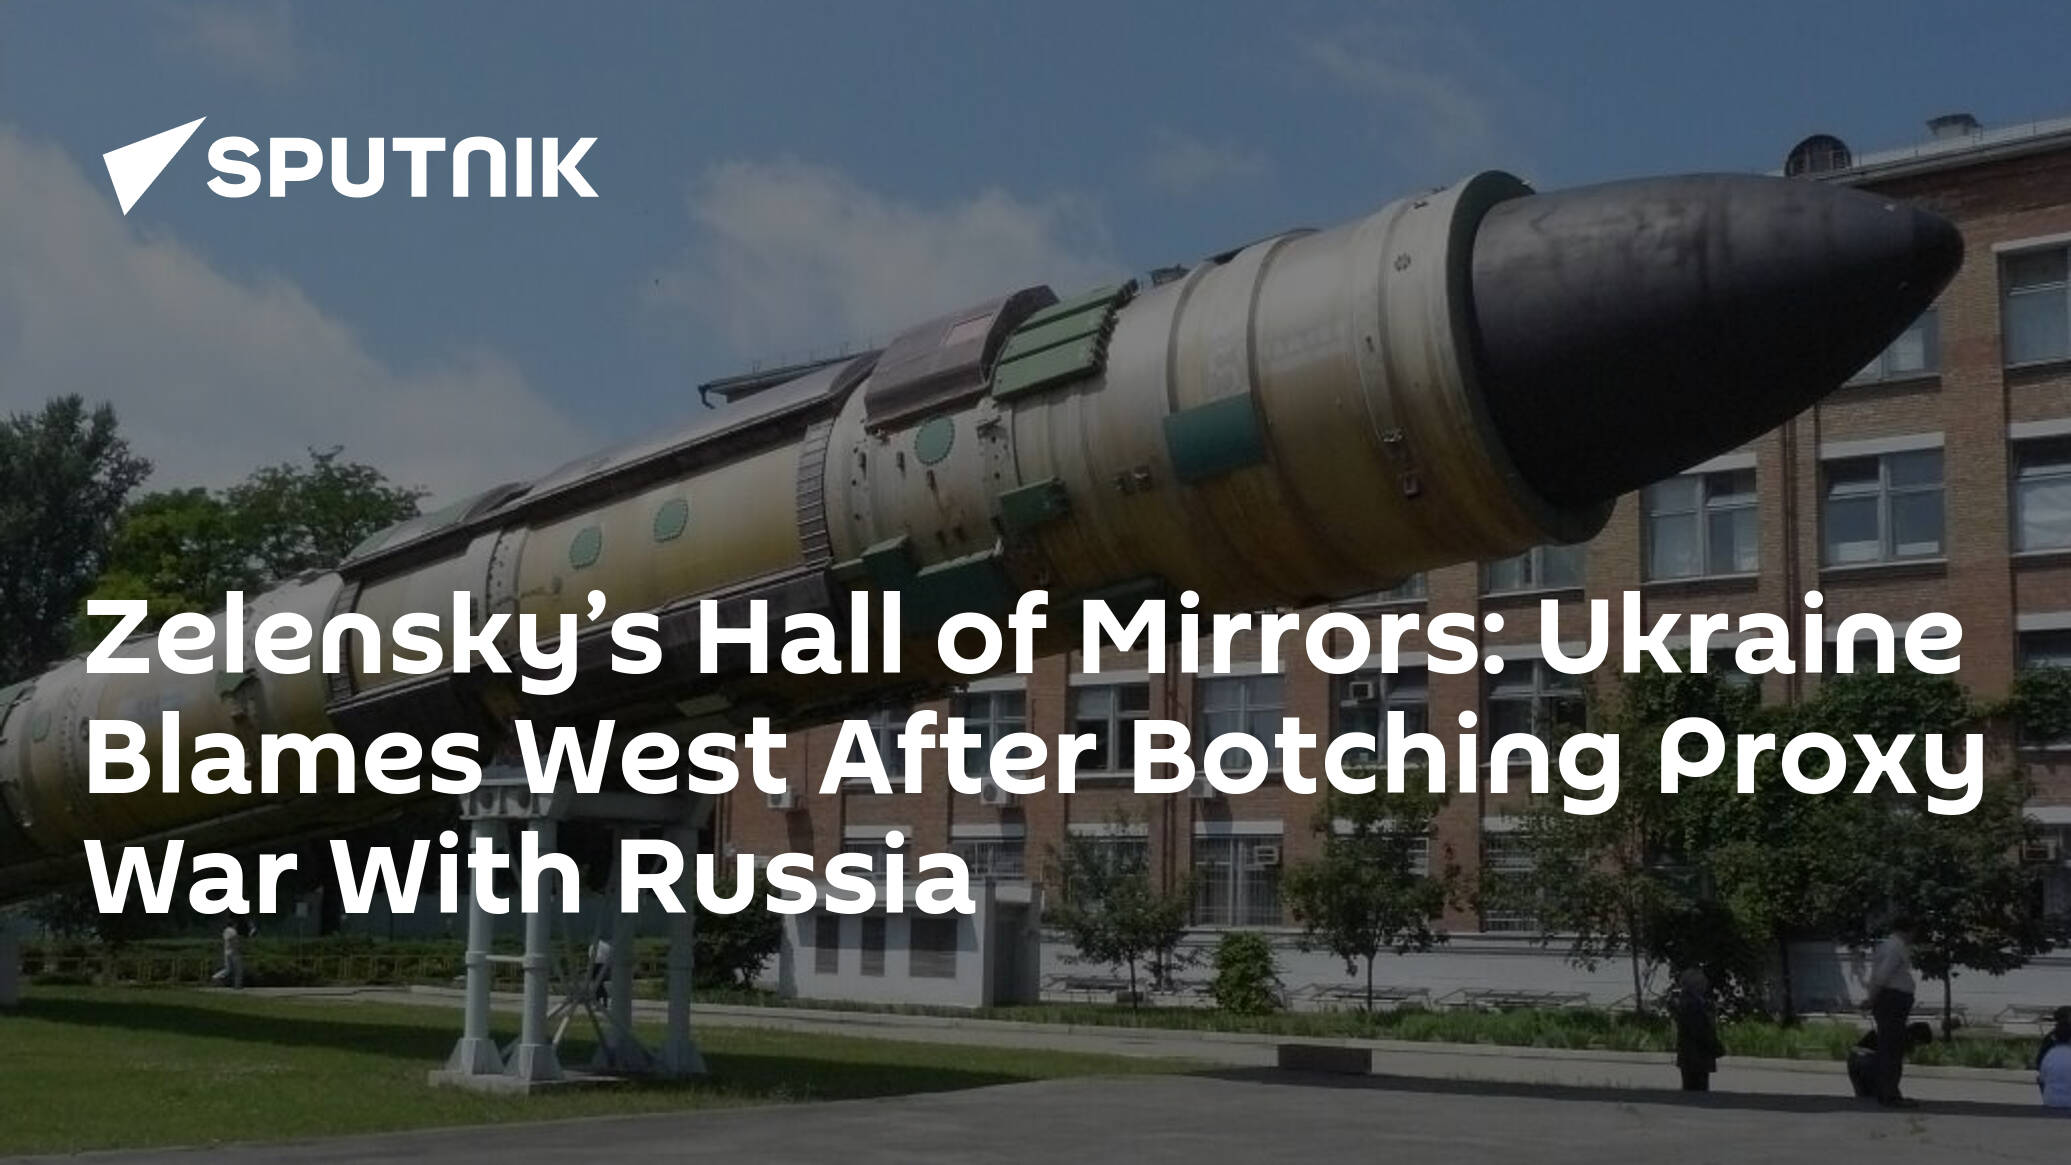 Zelensky’s Hall of Mirrors: Kiev Blames West After Botching Proxy War With Russia